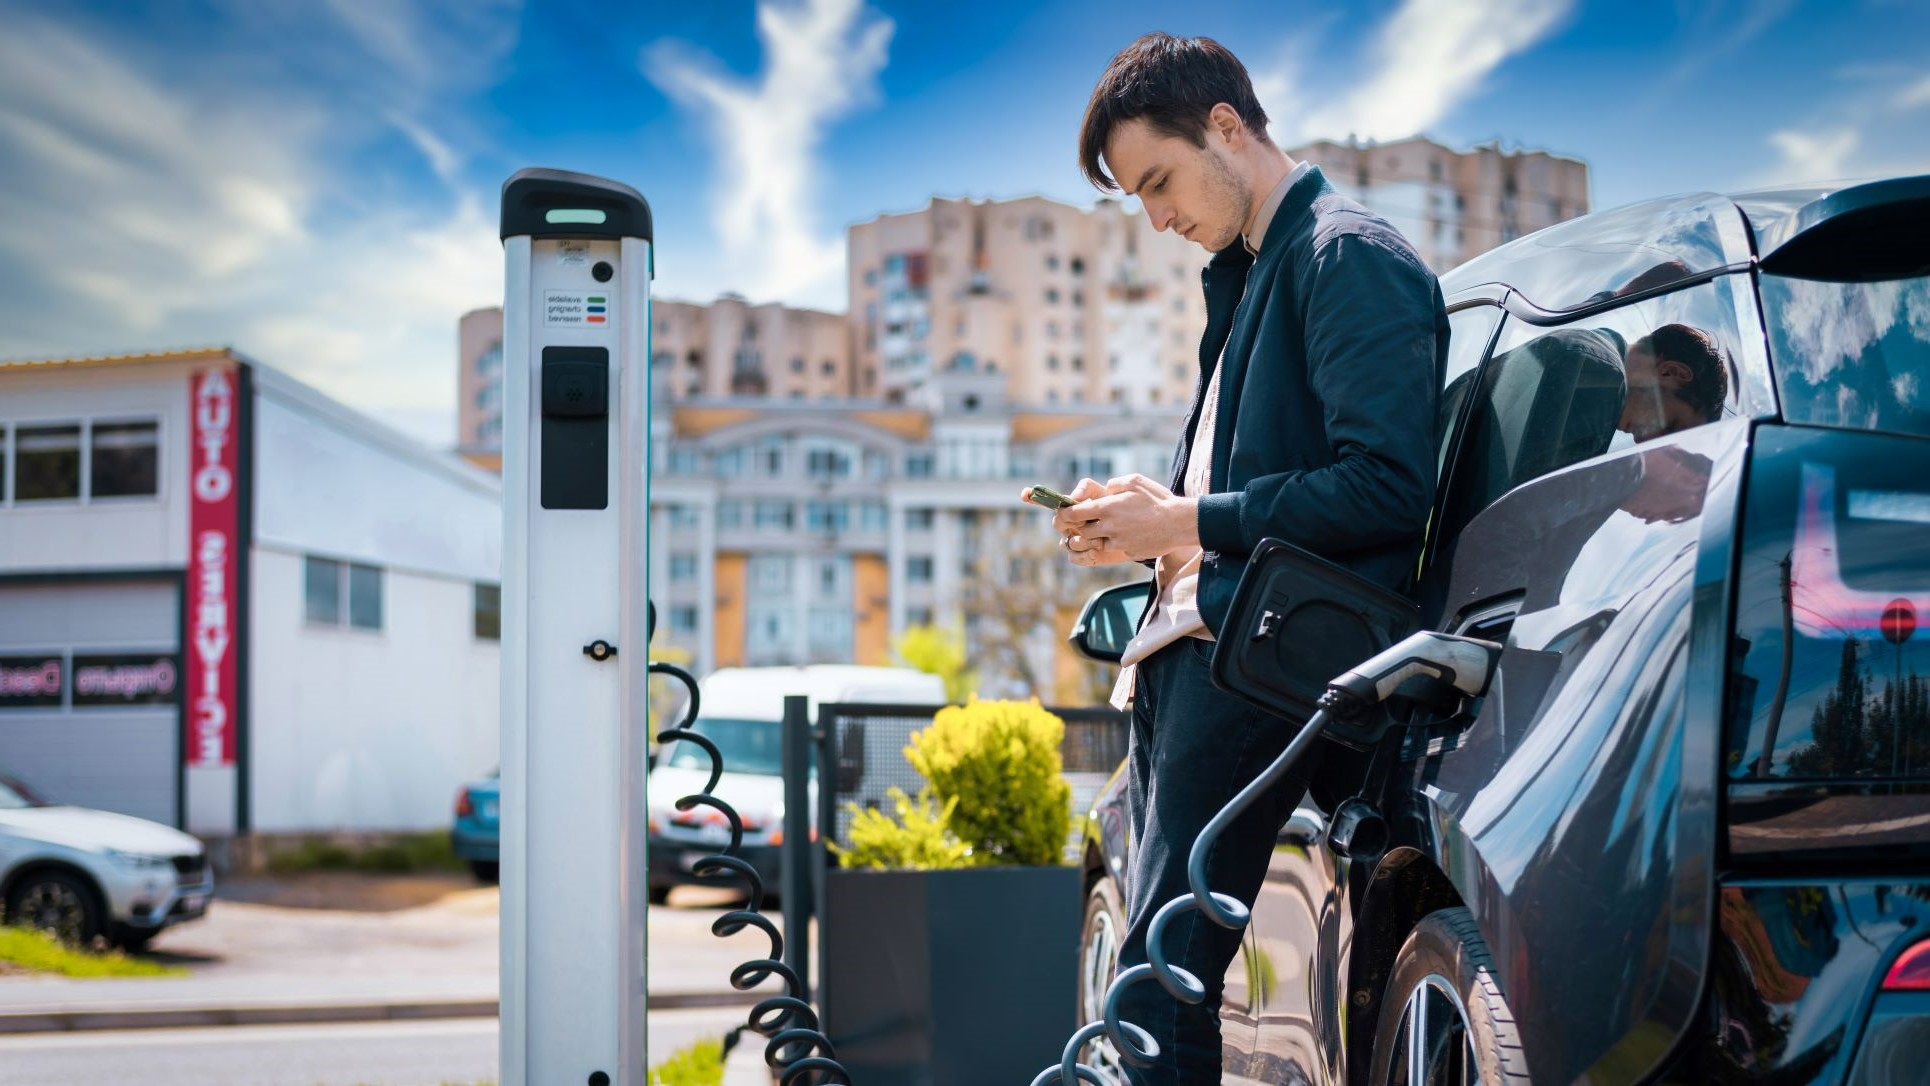 61d2d339749ca27930666c60_man-charging-his-electric-car-charge-station-using-smartphone (2)